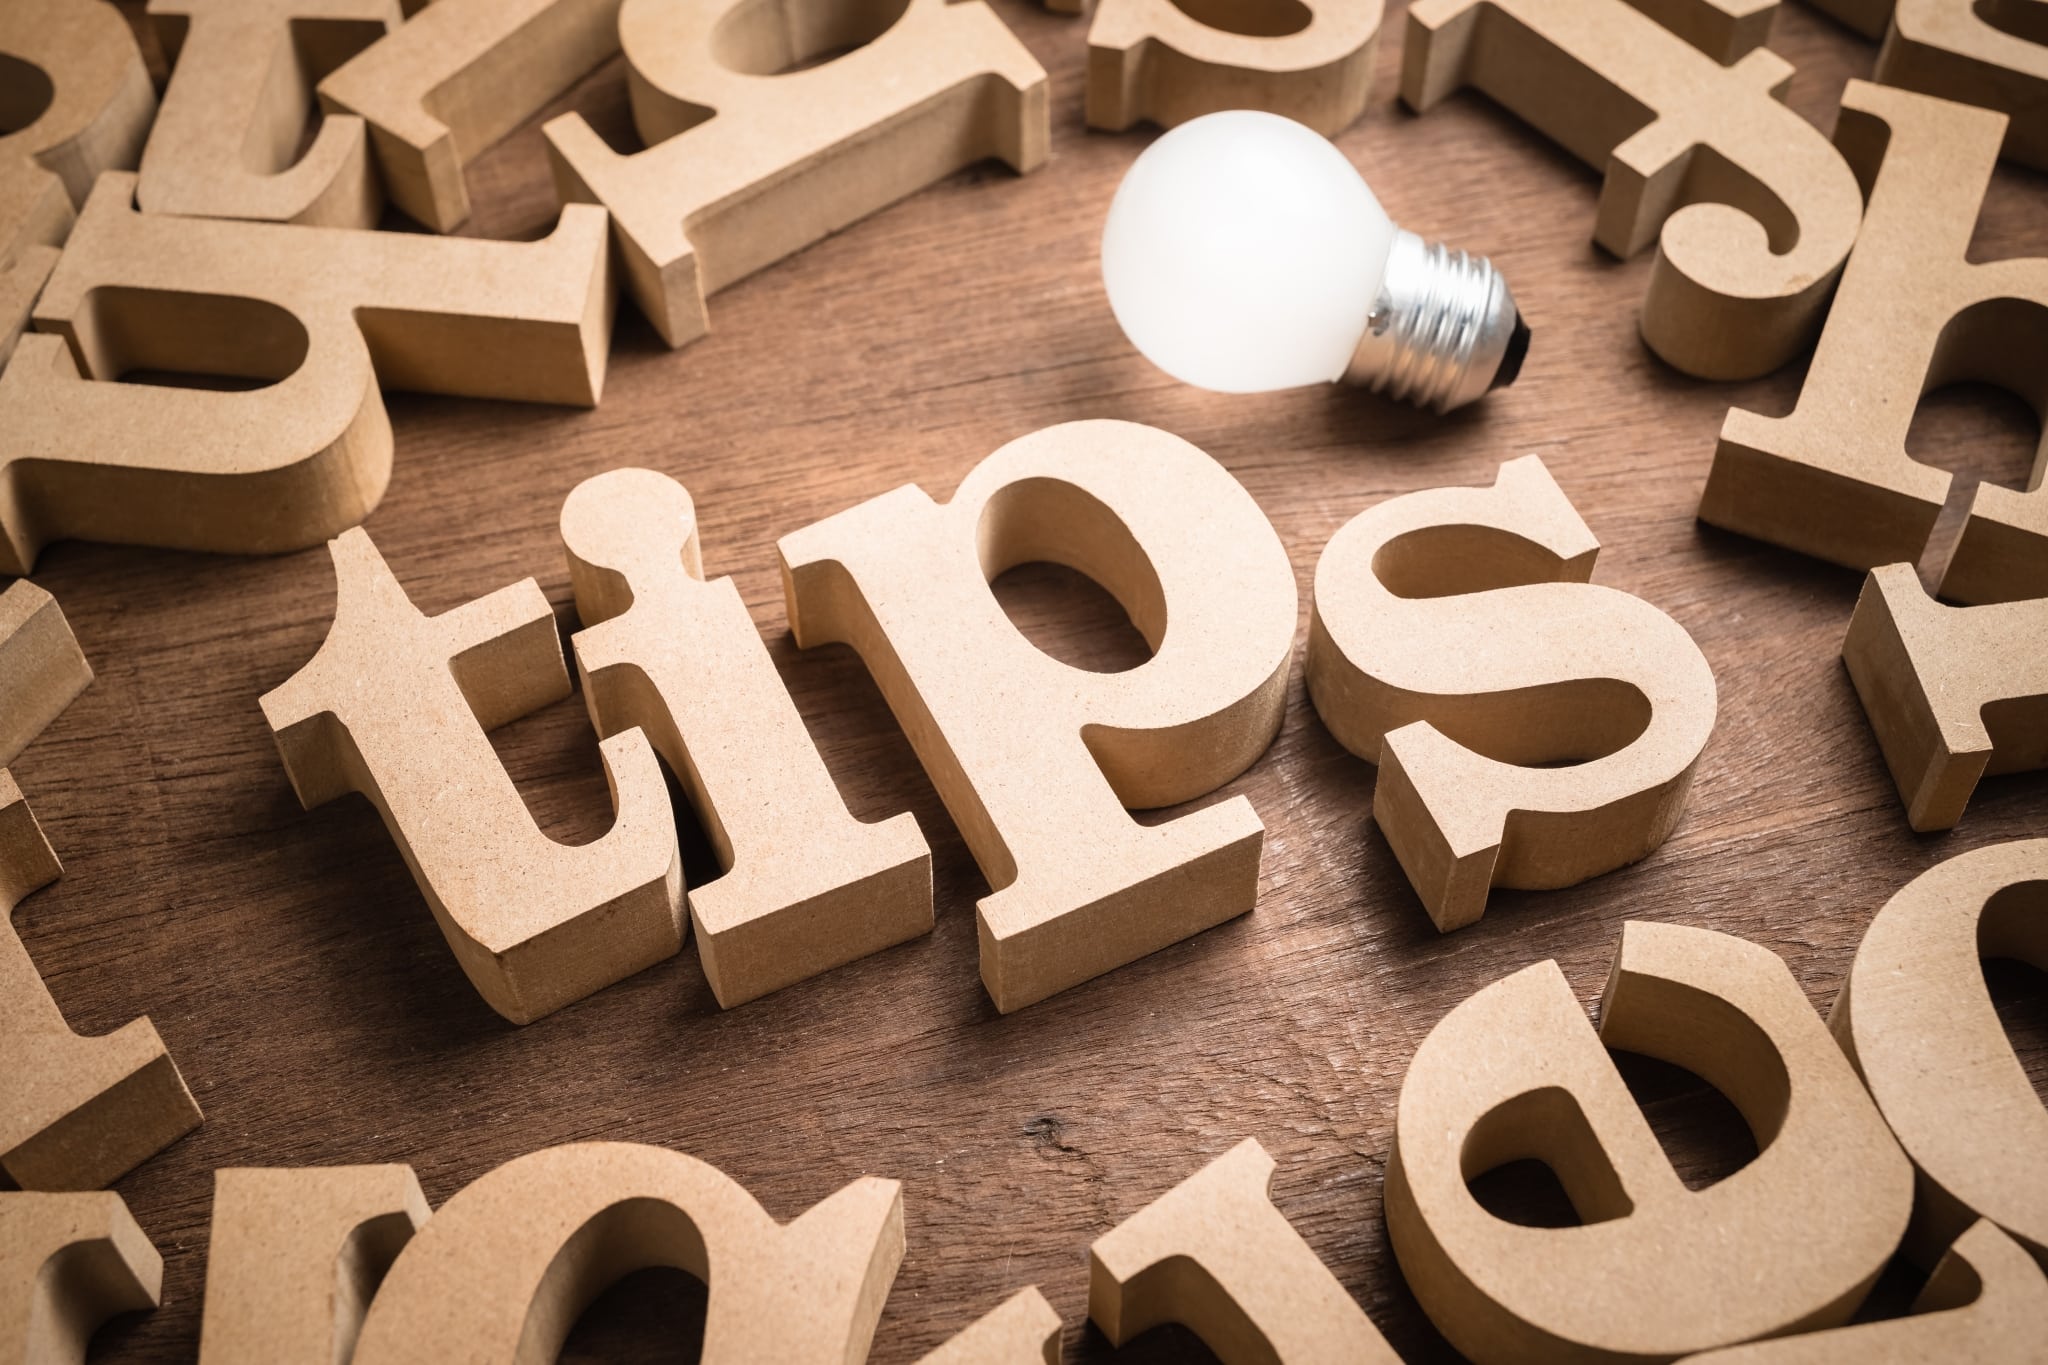 Tips in wood block letters next to a lightbulb